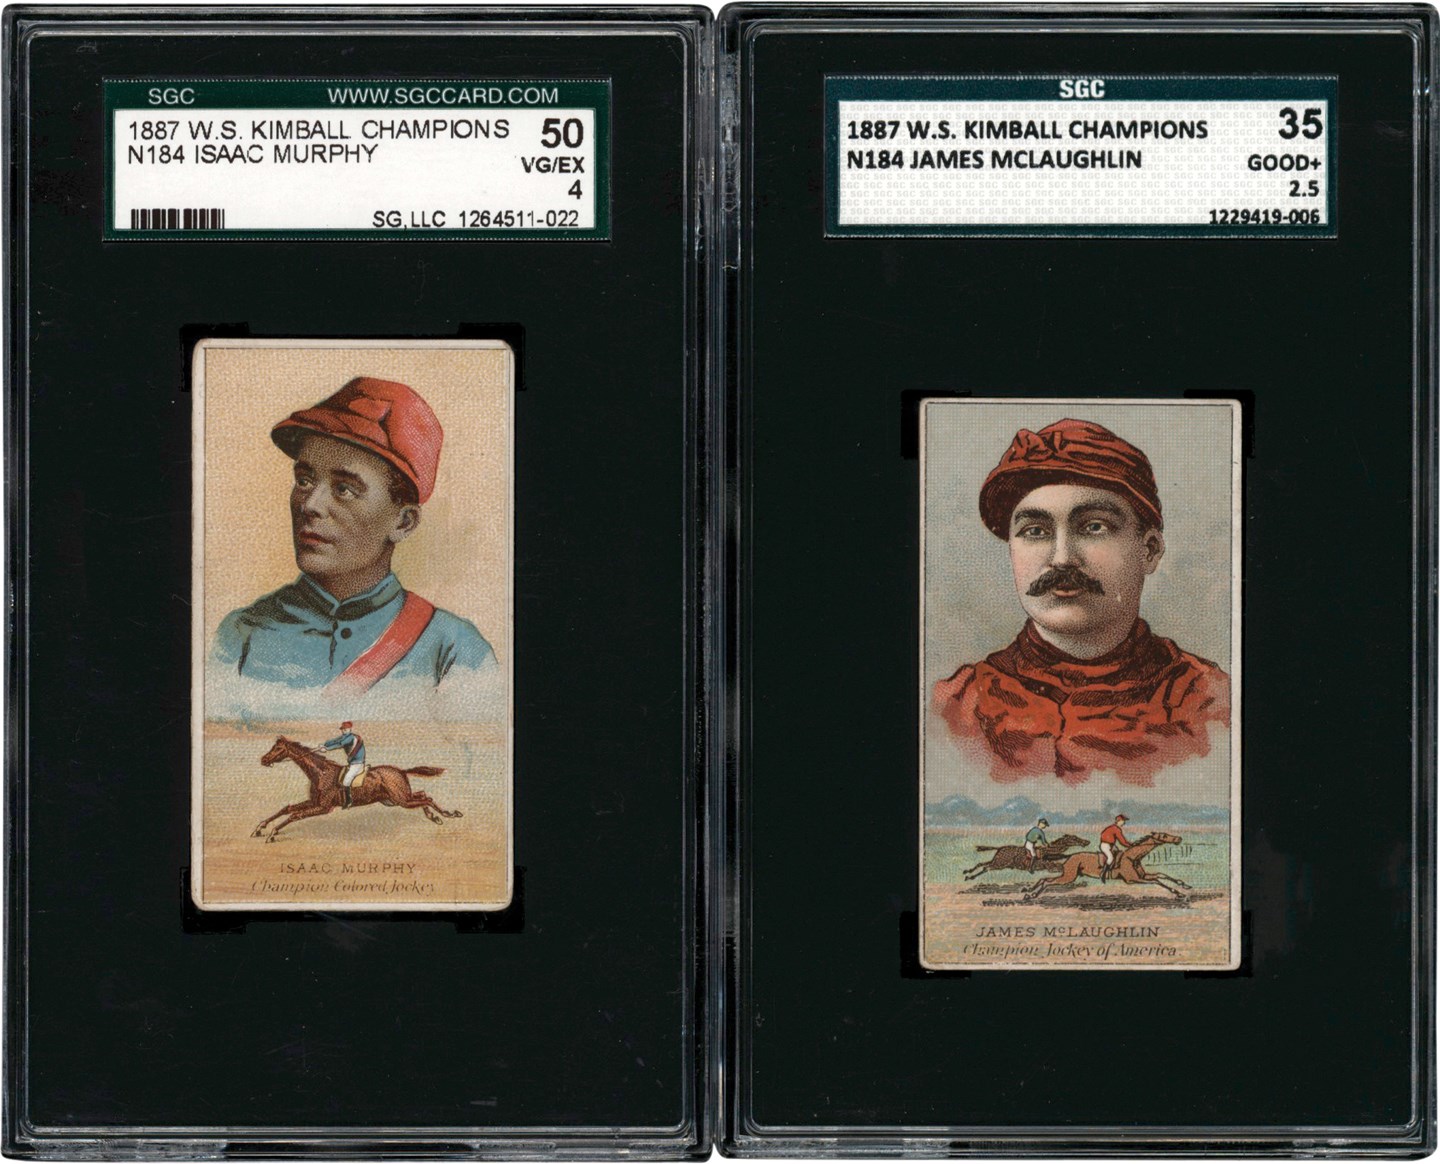 - Jockey Cards of the Two Most Famous and Successful American Riders of the 19th Century (2)